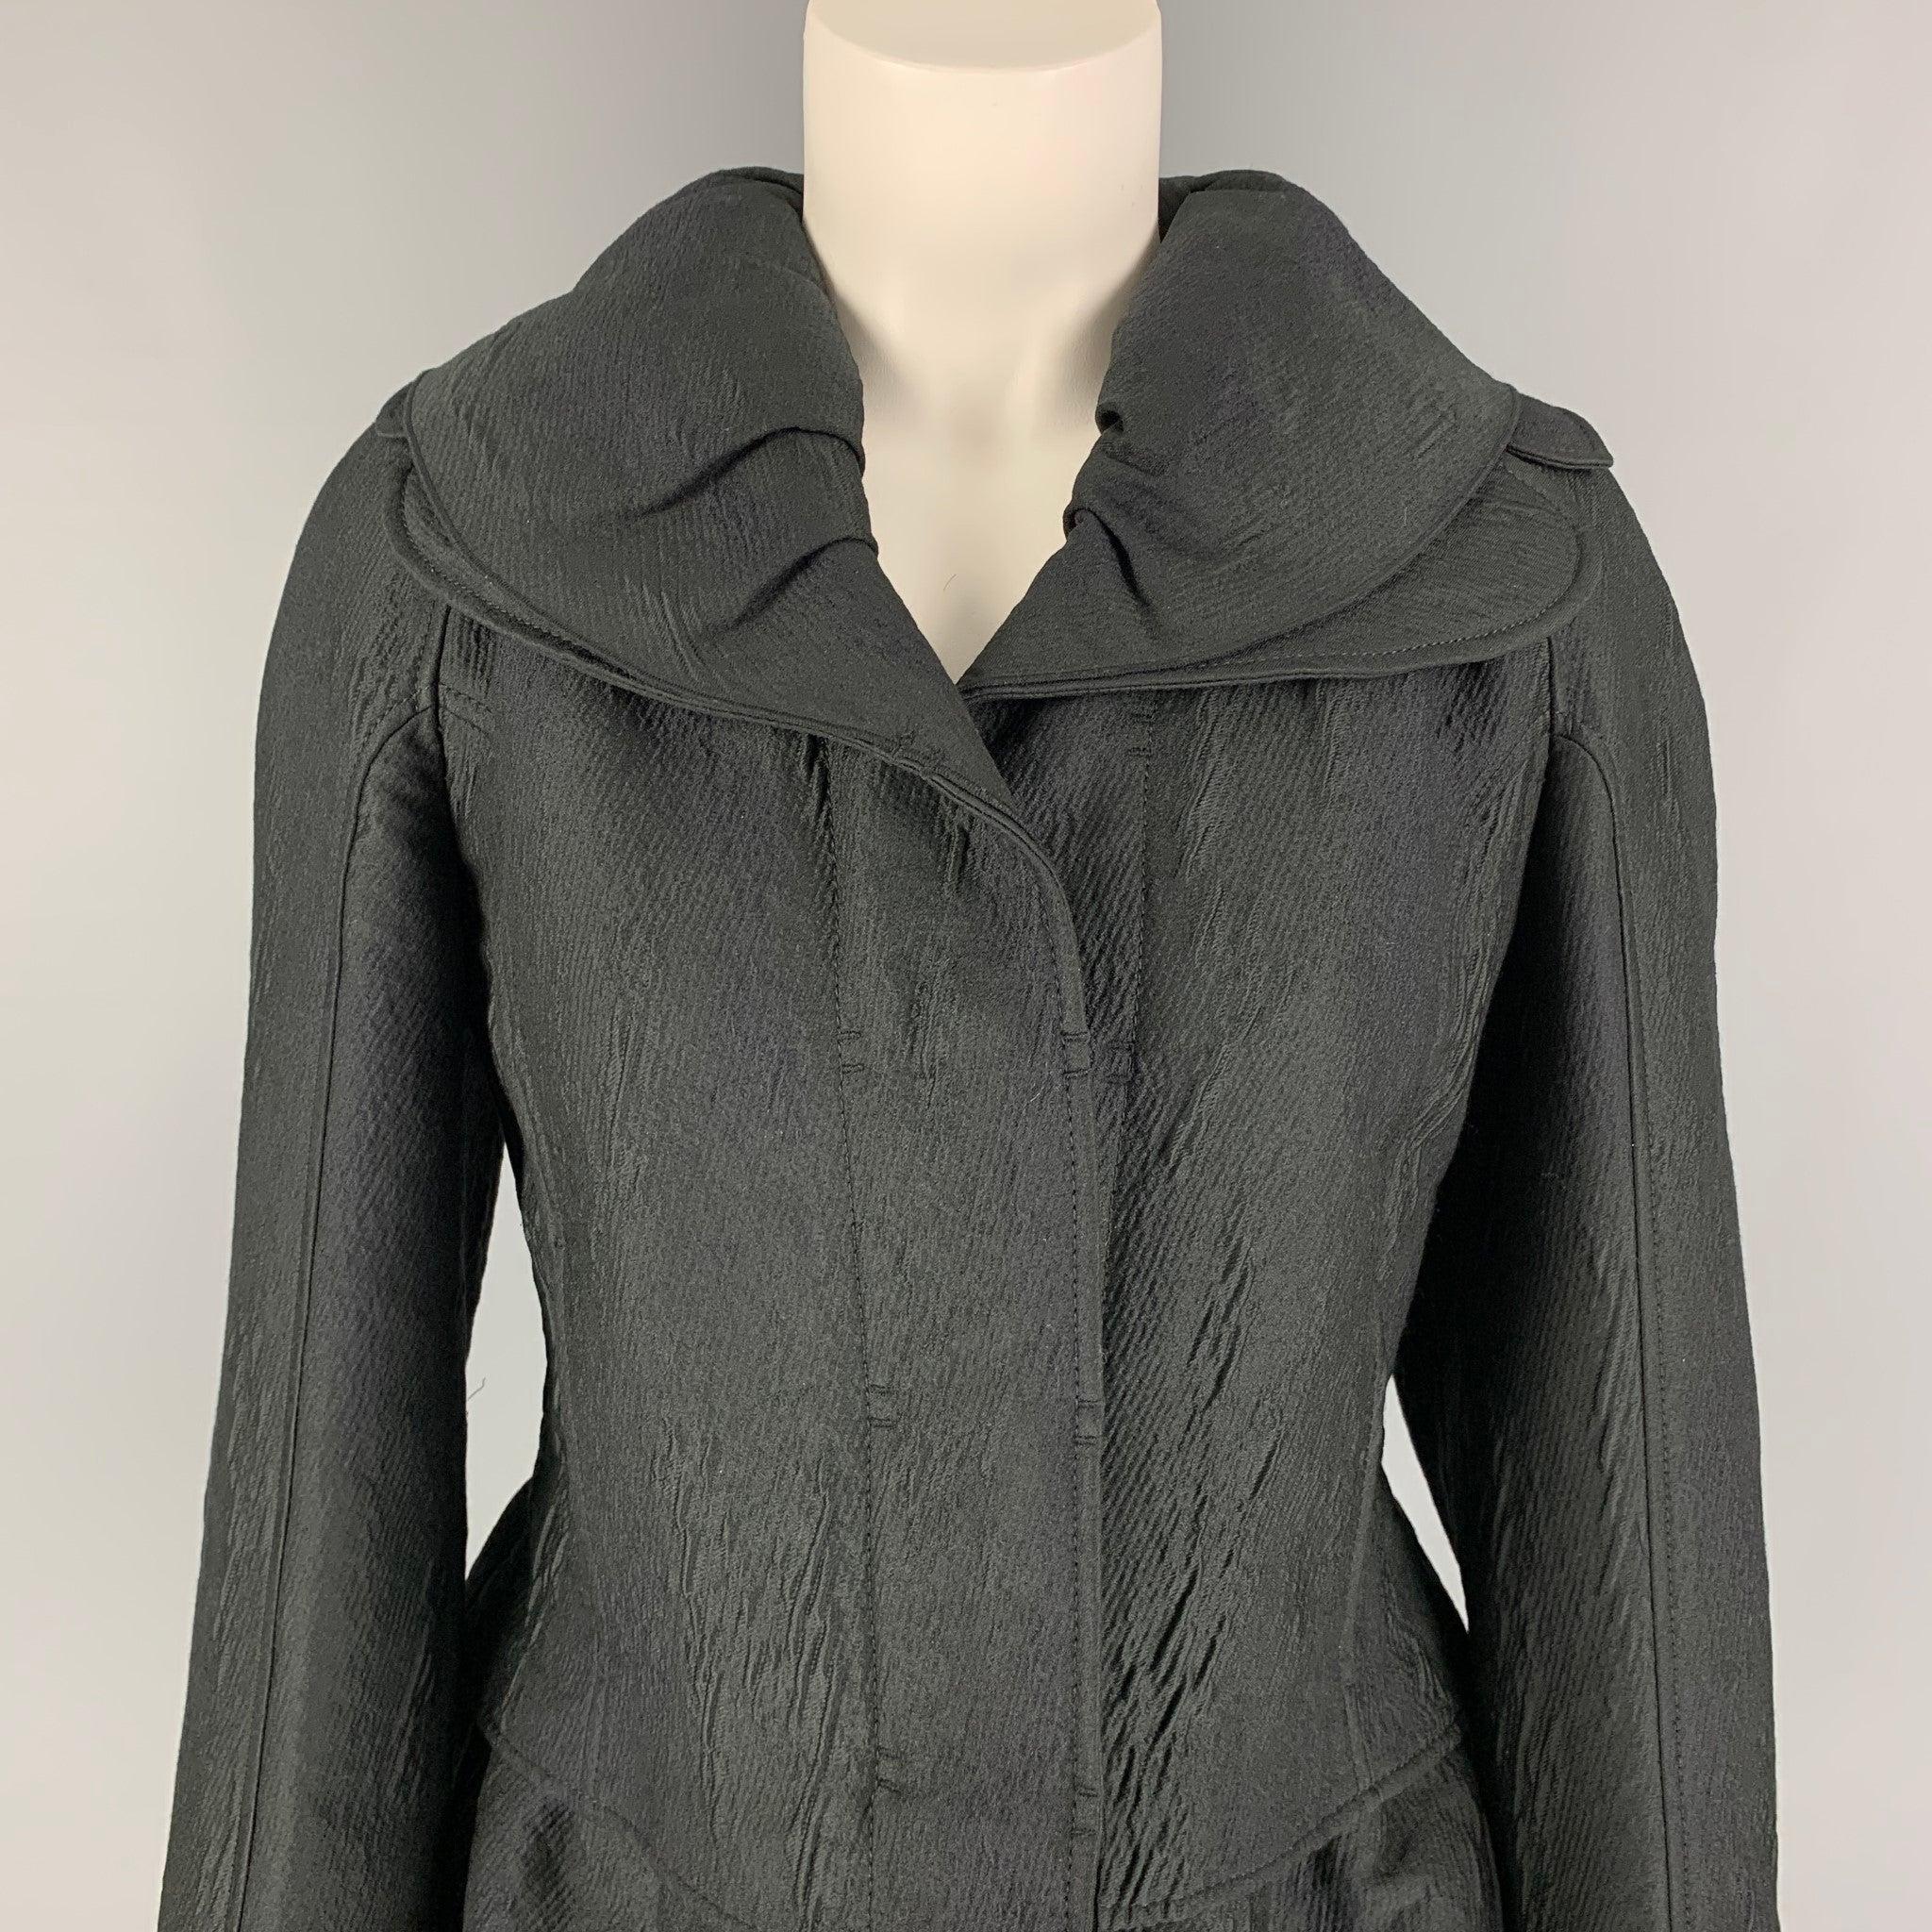 ROCHAS jacket comes in a black textured wool featuring a double collar, peplum style, slit pockets, and a hidden placket closure. Made in France.
Very Good
Pre-Owned Condition. 

Marked:   40 

Measurements: 
 
Shoulder: 17 inches  Bust: 36 inches 